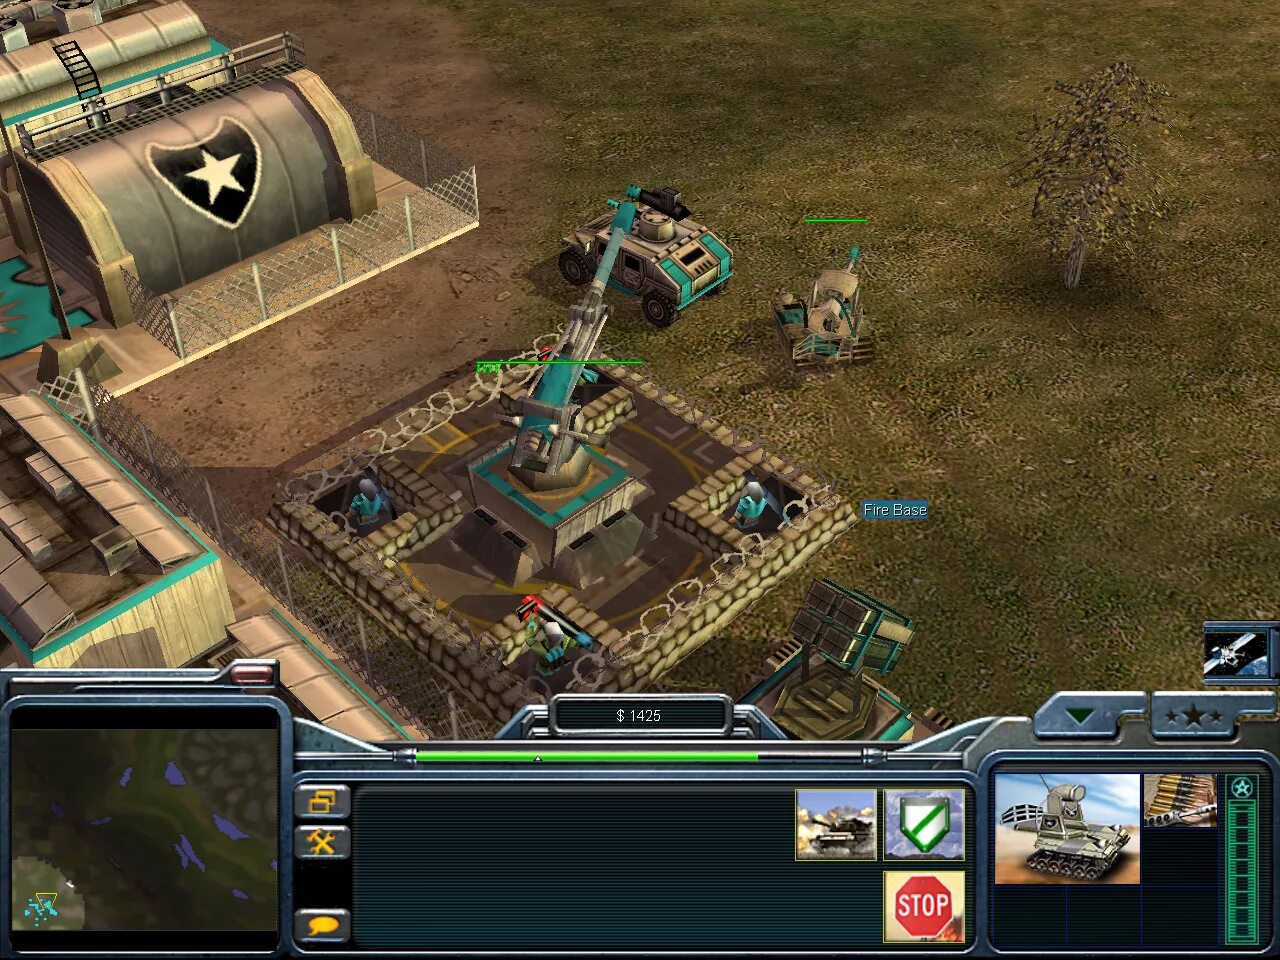 Command and Conquer Zero hour. Command and Conquer Generals 2022. Command & Conquer: Generals - Zero hour. Command Conquer Generals 2020.